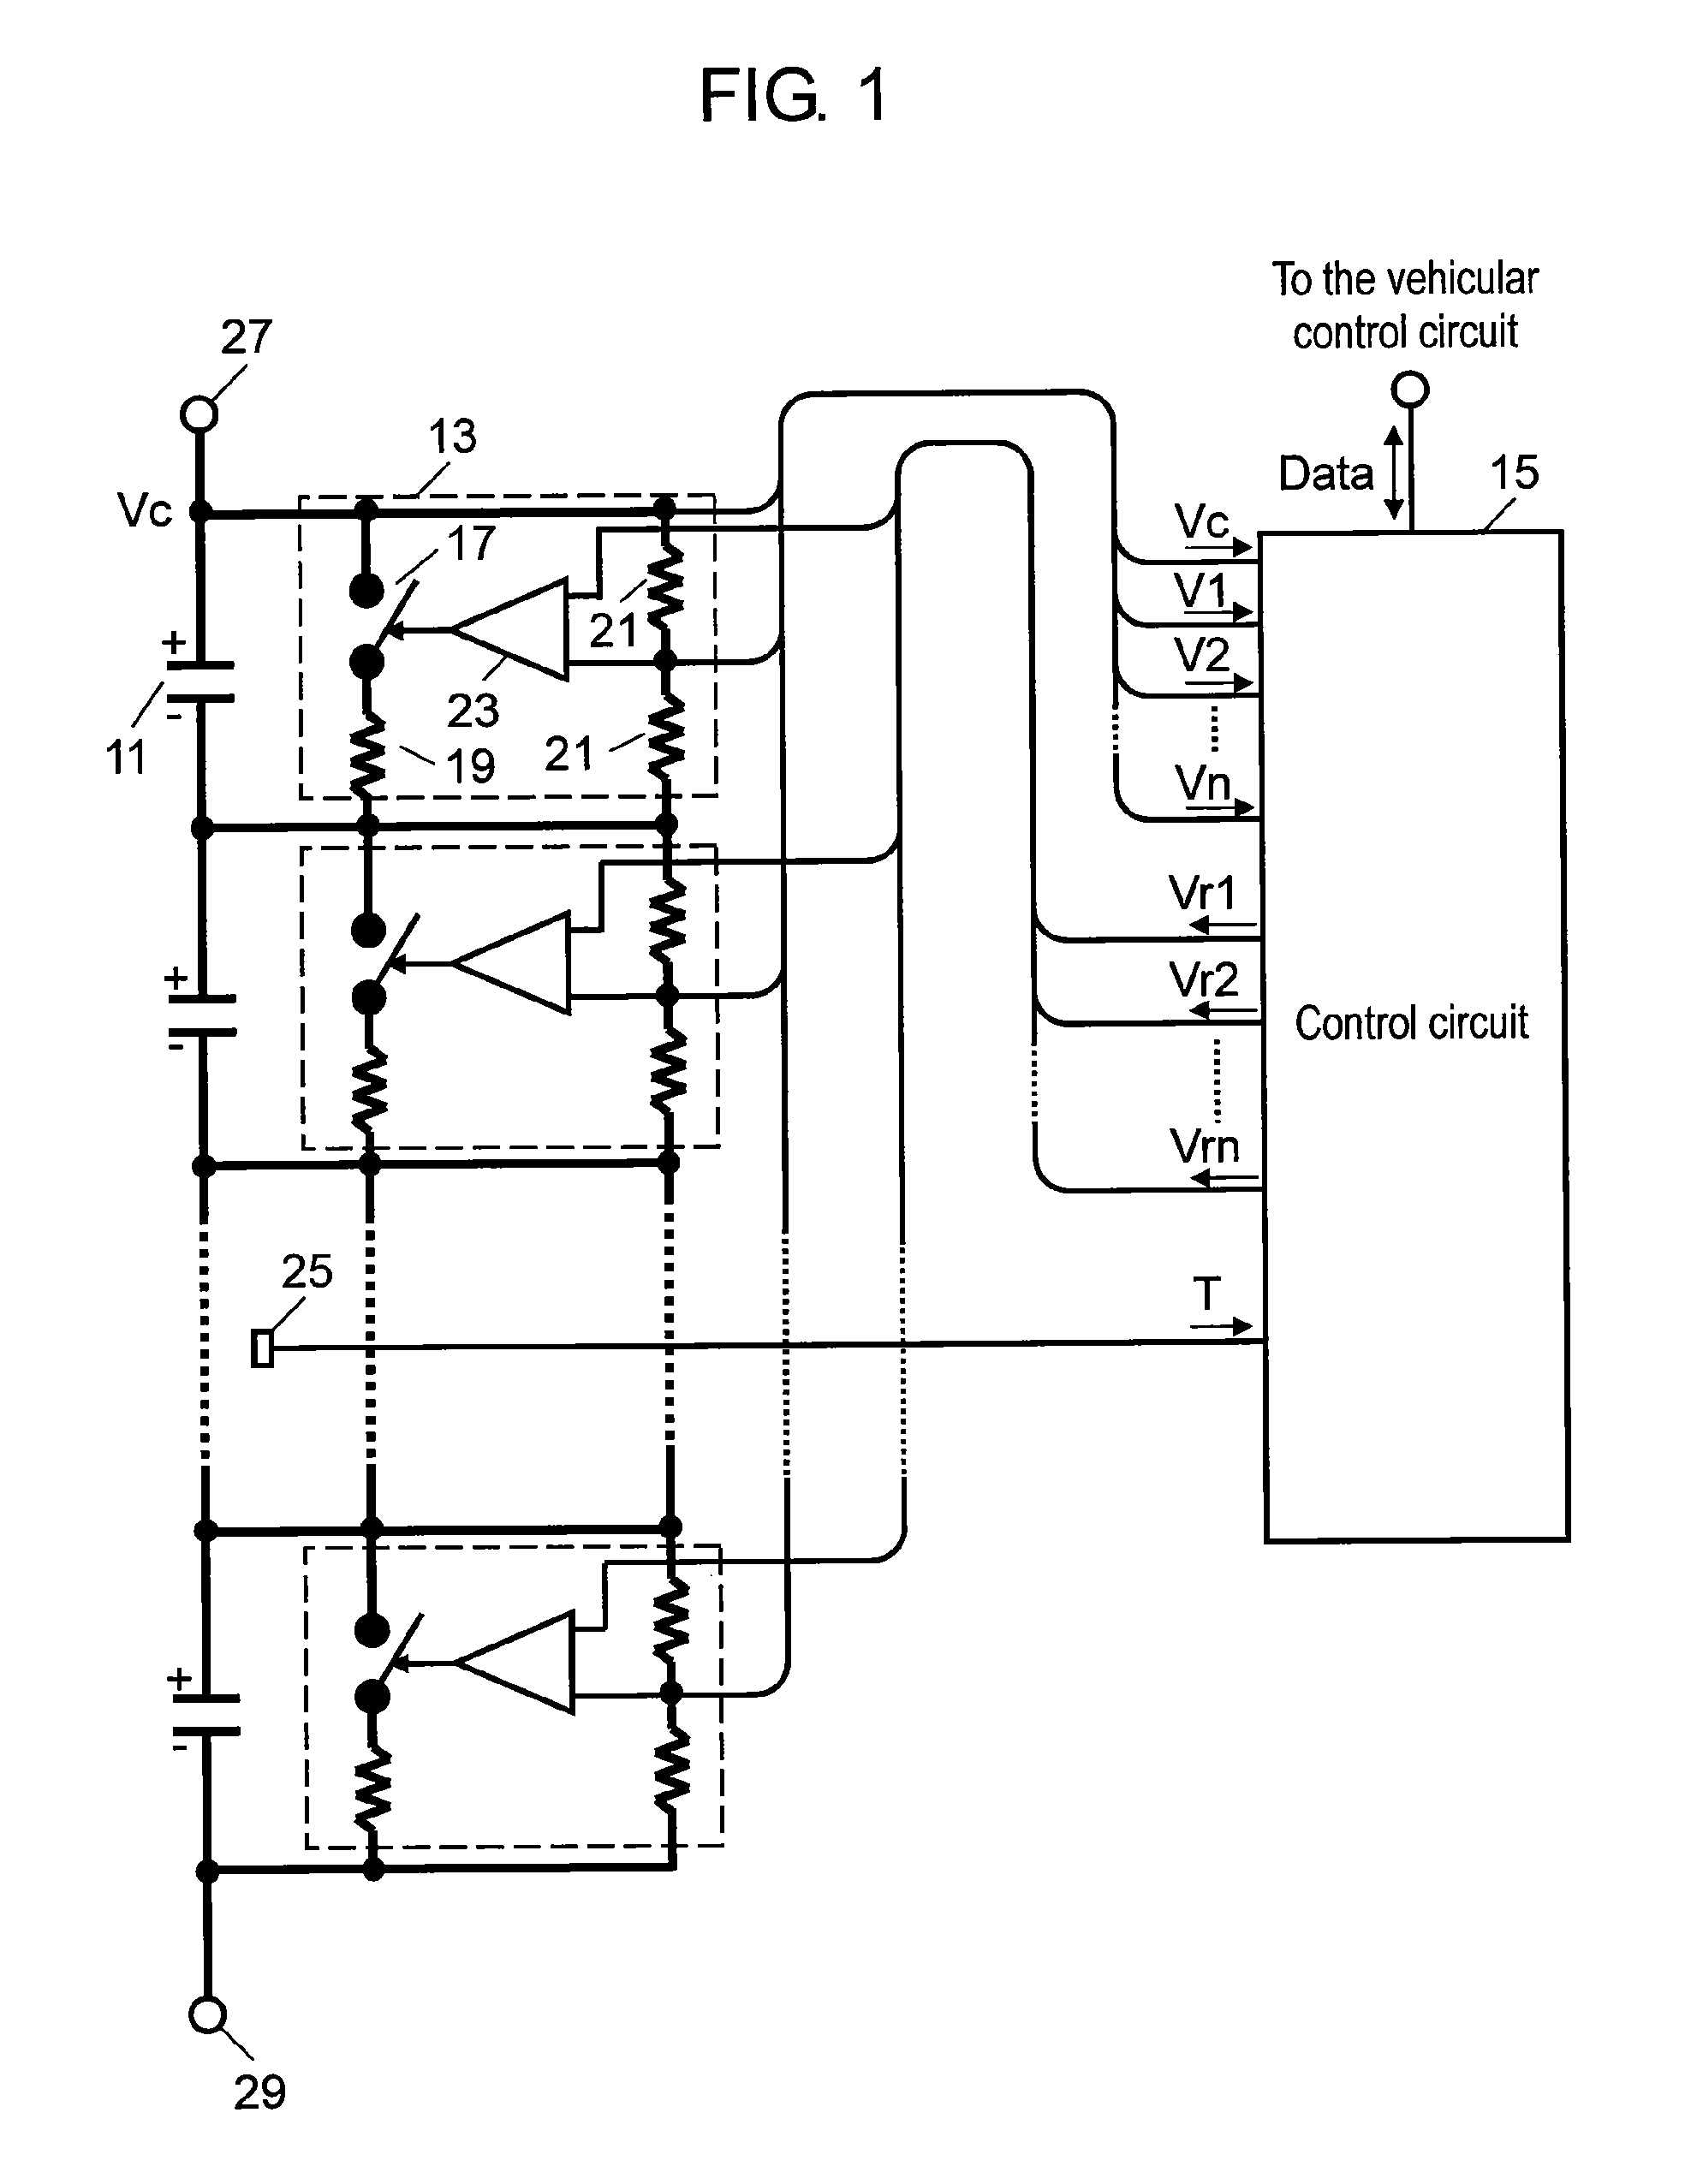 Electricity accumulating device